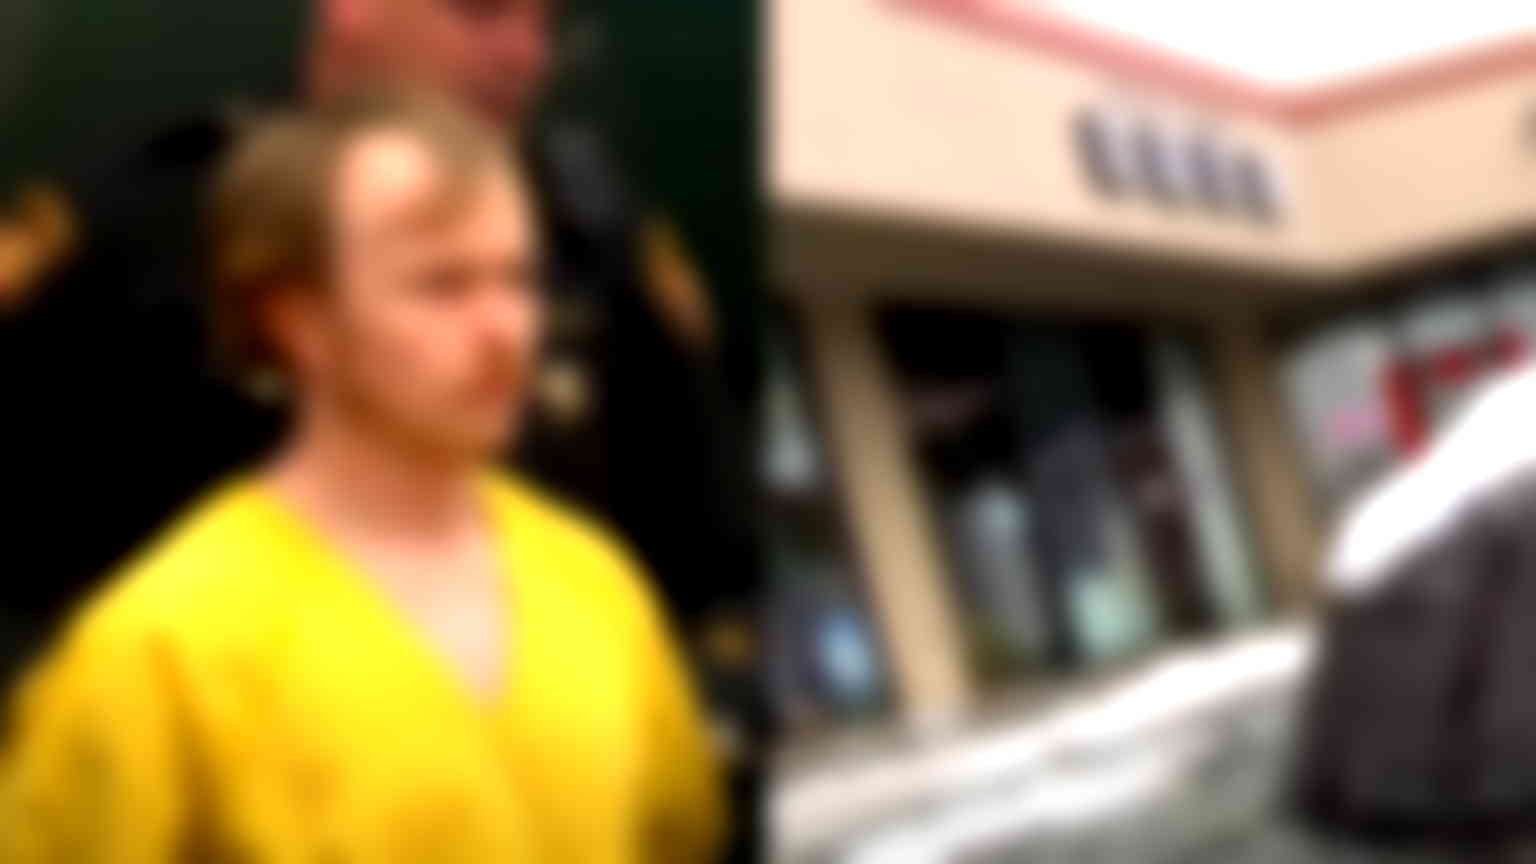 Ohio man claiming to be ‘president of Tokyo’ arrested for shooting at Asian grocery